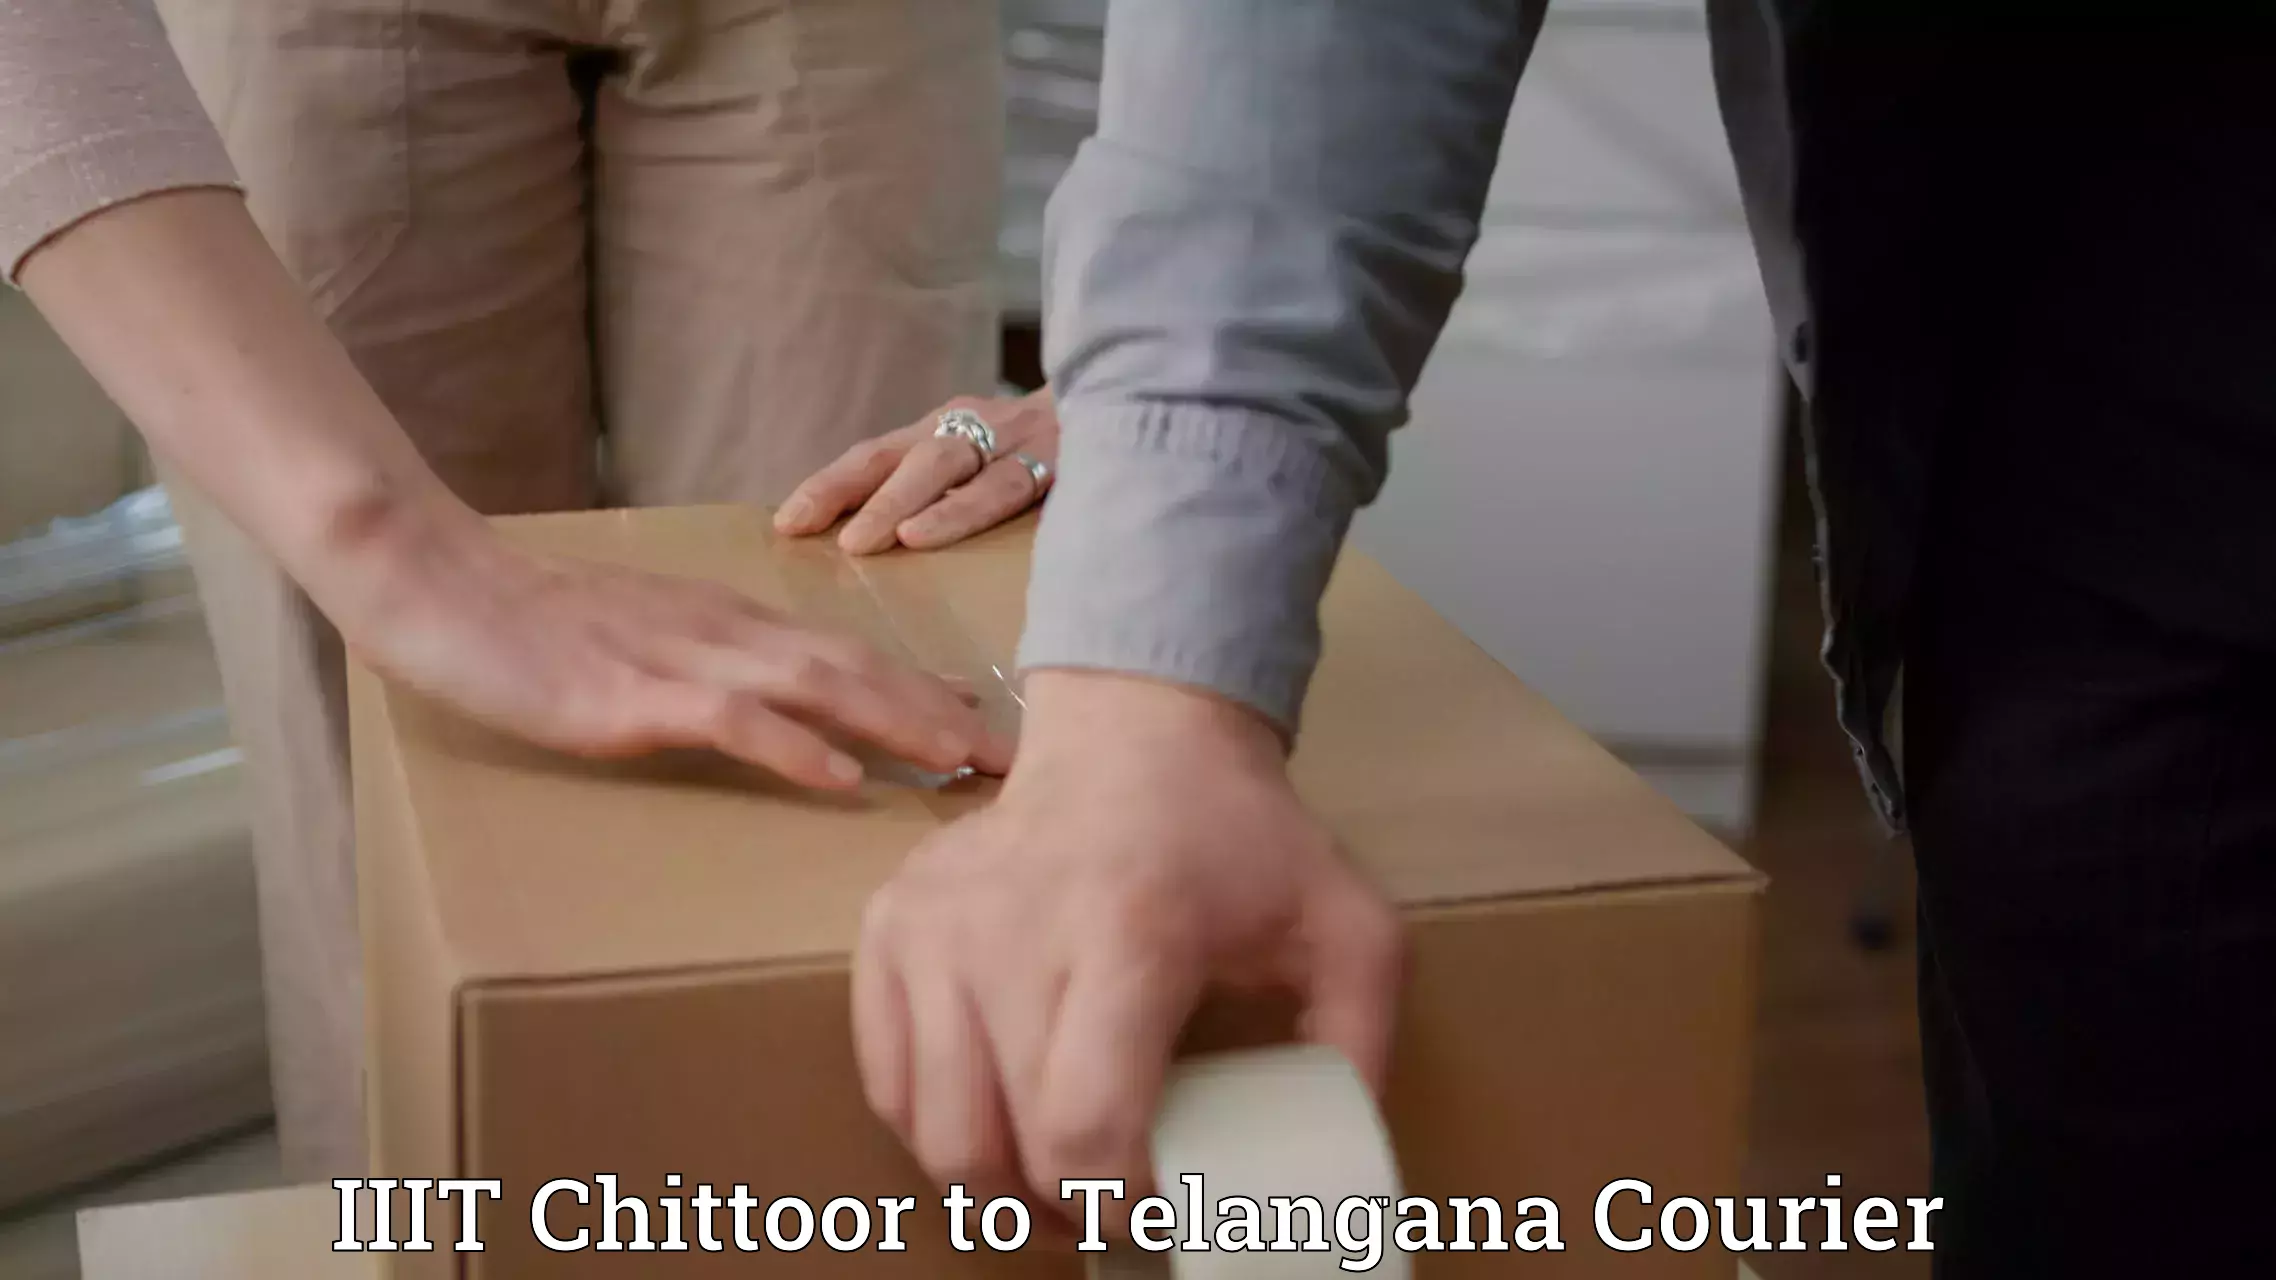 Affordable shipping rates in IIIT Chittoor to Hyderabad